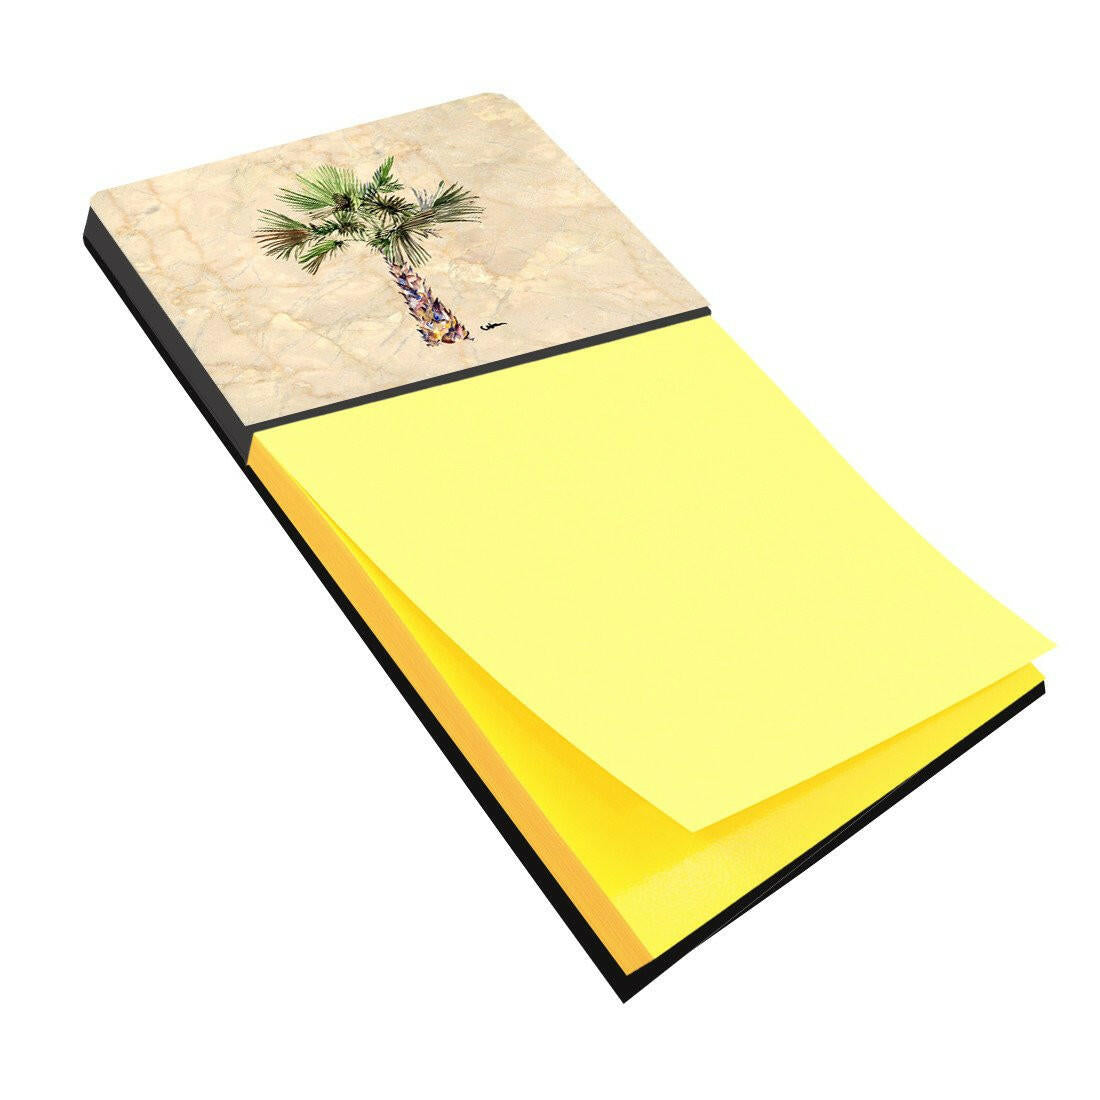 Palm Tree Refiillable Sticky Note Holder or Postit Note Dispenser 8480SN by Caroline's Treasures